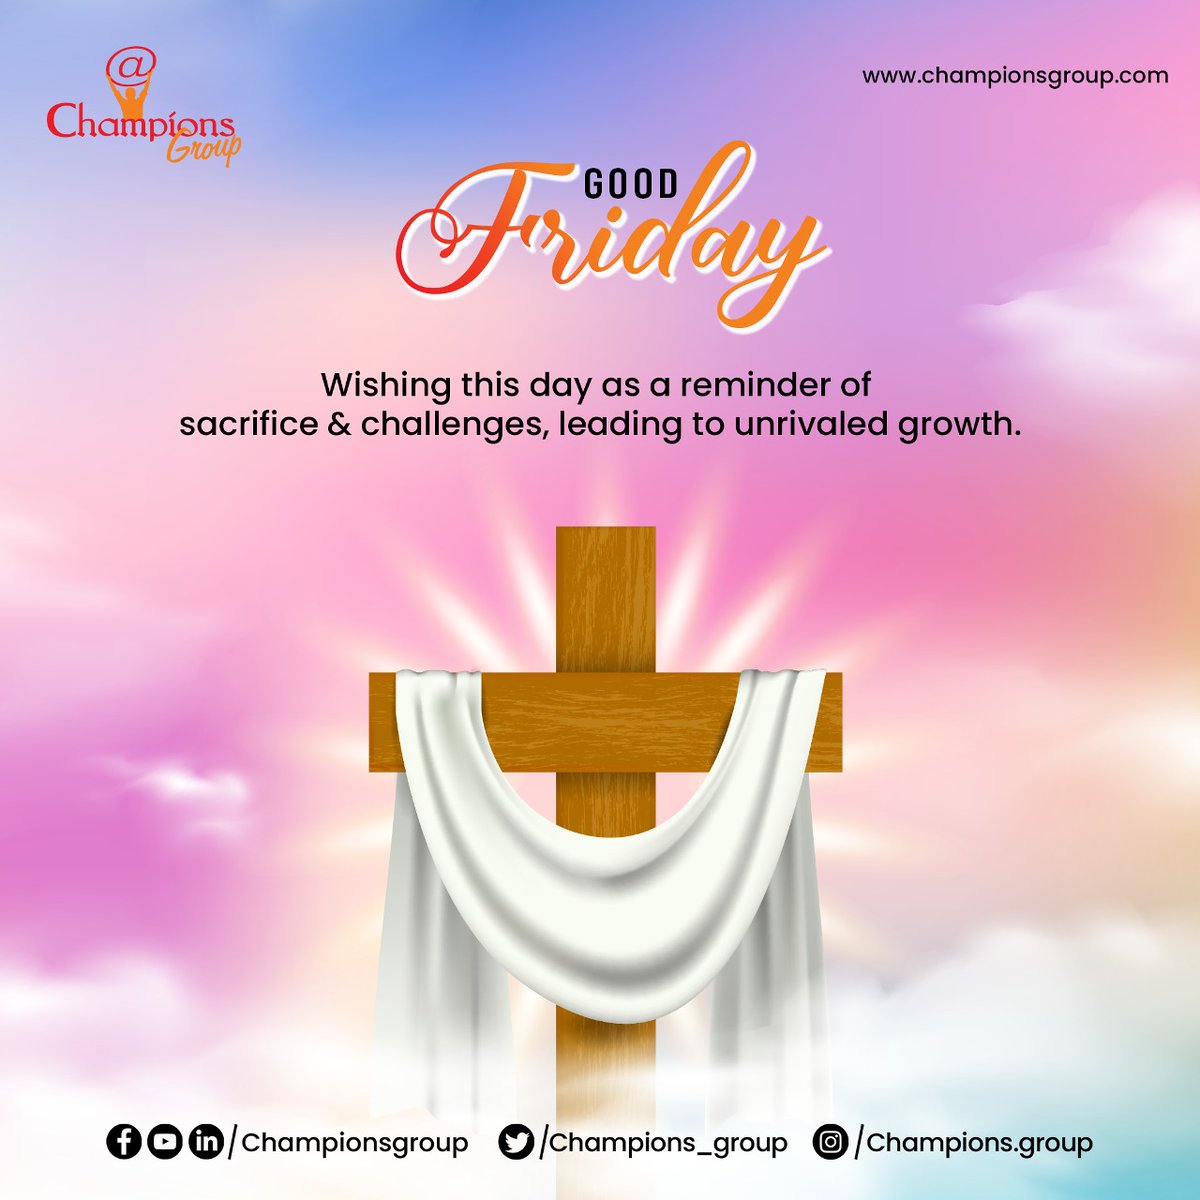 🌟#GoodFriday from #ChampionsGroup! 🌟 🌱 Reflect on sacrifice: Past sacrifices shape future triumphs. 💪 Overcome challenges to grow stronger and wiser. 🌿 Unrivaled #growth through perseverance and resilience. Embrace obstacles as stepping stones to success.